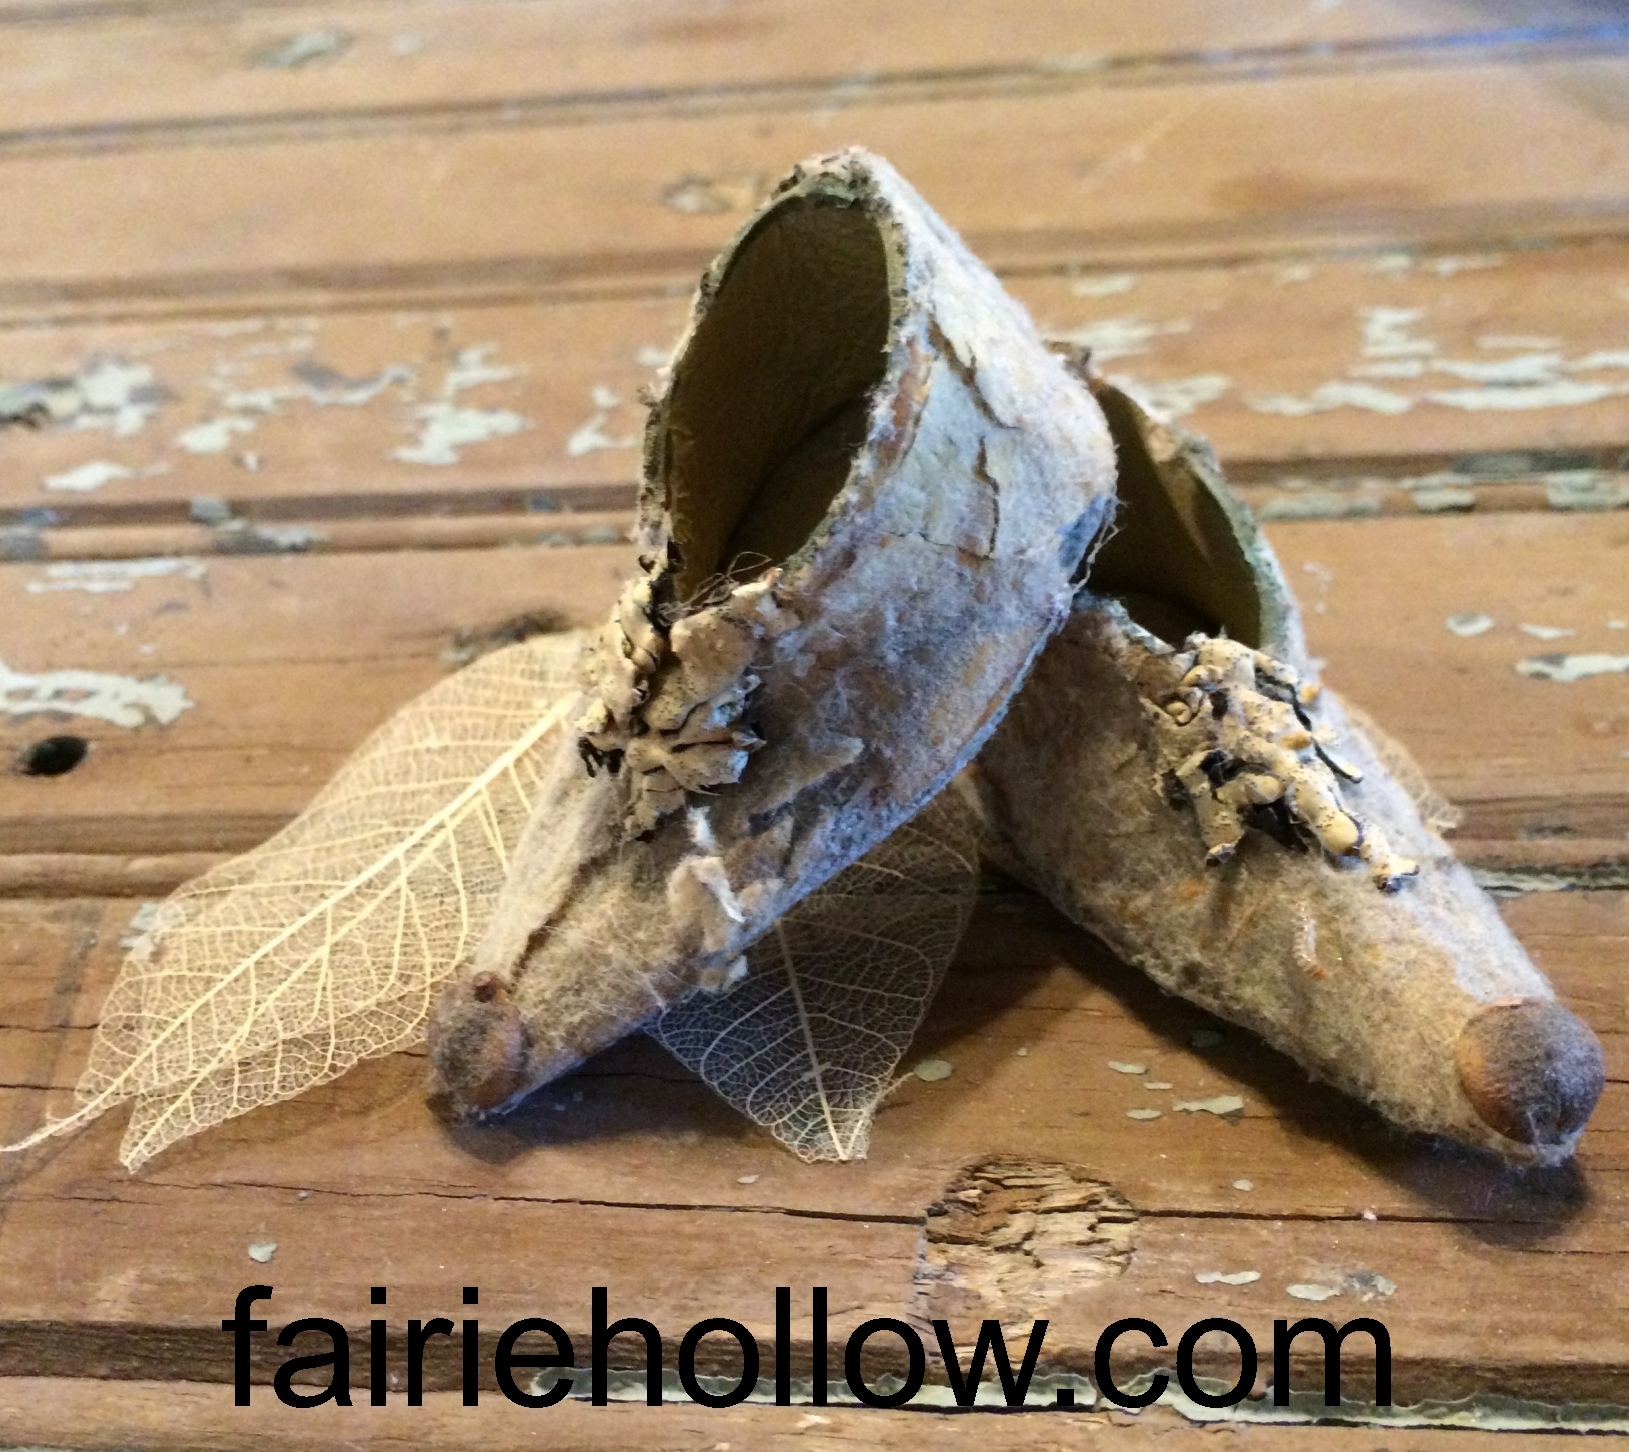 Fairy shoes made from lambs ear and pods. Get the patterns for these shoes|fairiehollow.com